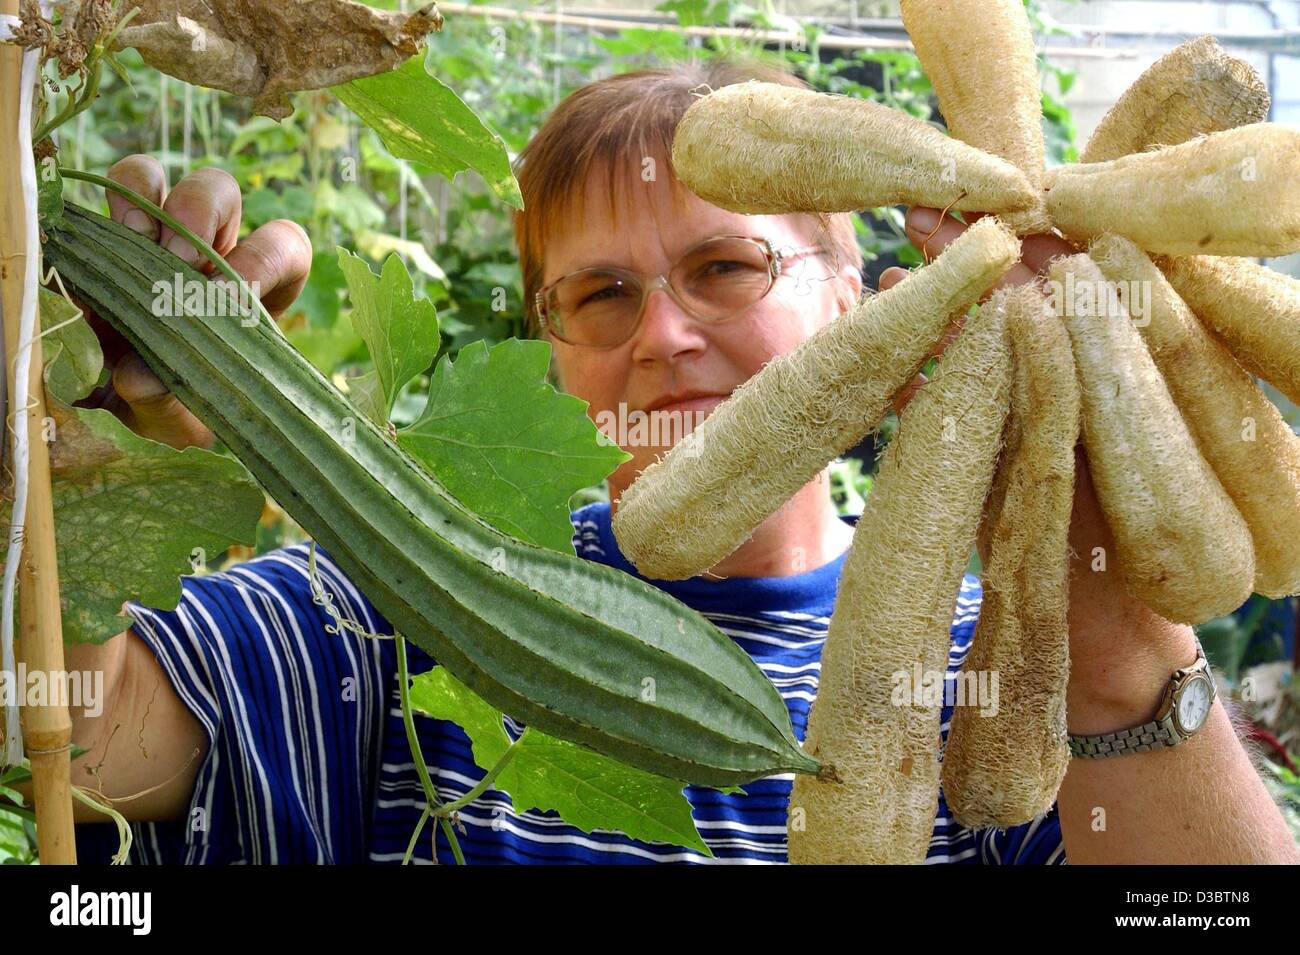 (dpa) - Karin Kiworra of the club for the preservation and recultivation of useful plants (VERN) shows a fresh sponge luffa (L) and a handful of dried sponge luffas (R), in Greifenberg, Germany, 28 August 2003. The sponge luffa plant is a tropical running vine with rounded leaves and yellow flowers. Stock Photo